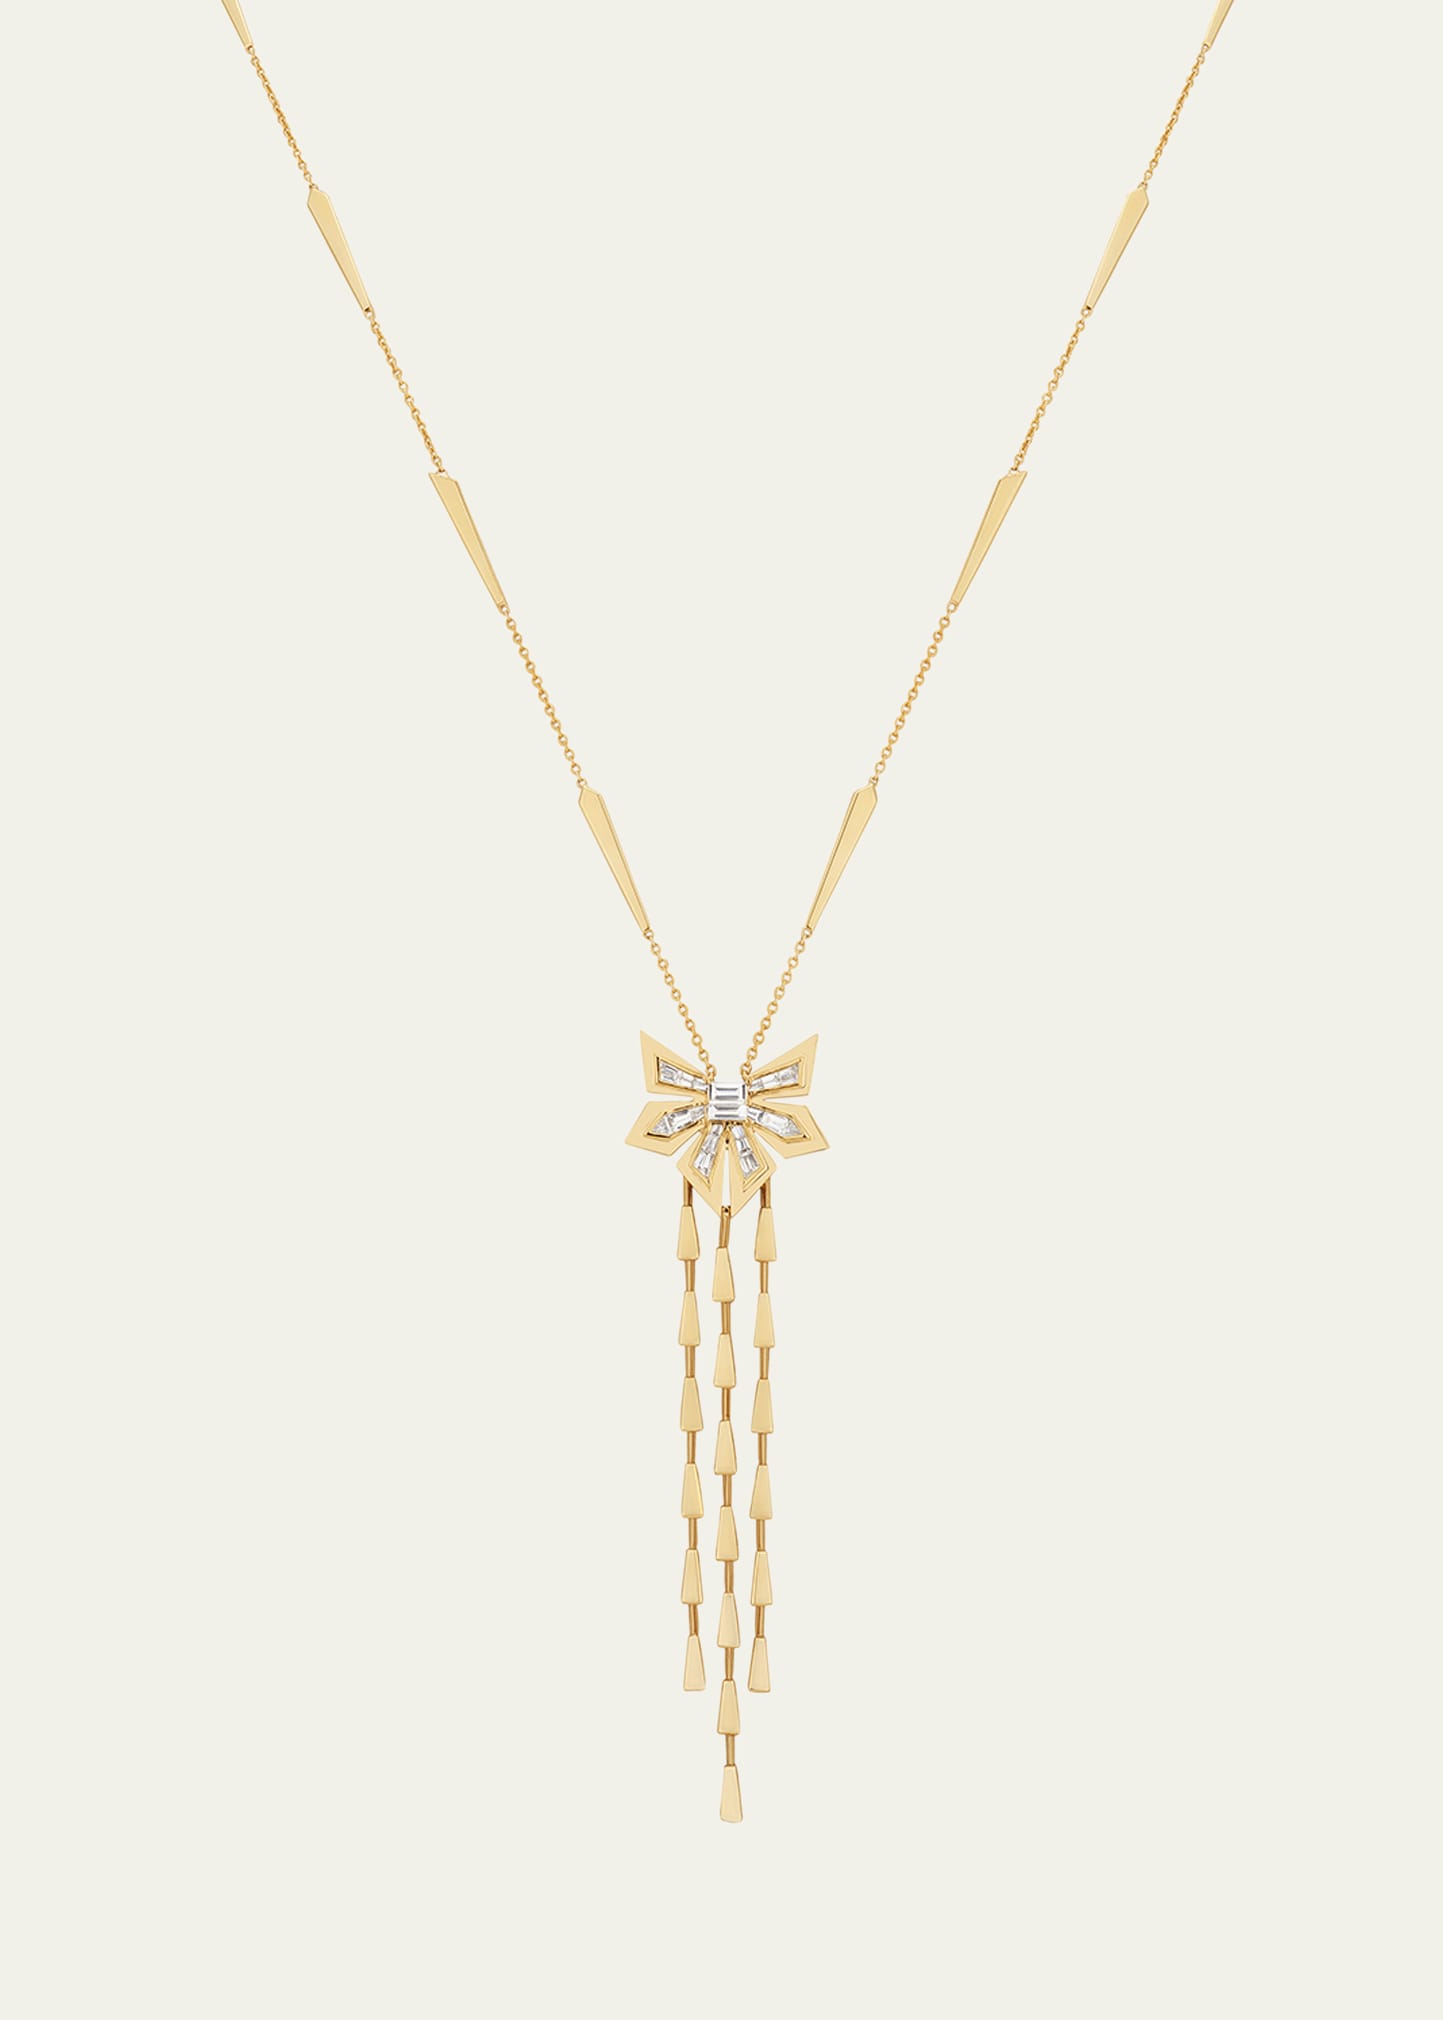 Yellow Gold Dynamite Necklace with Diamonds and Detachable Drop